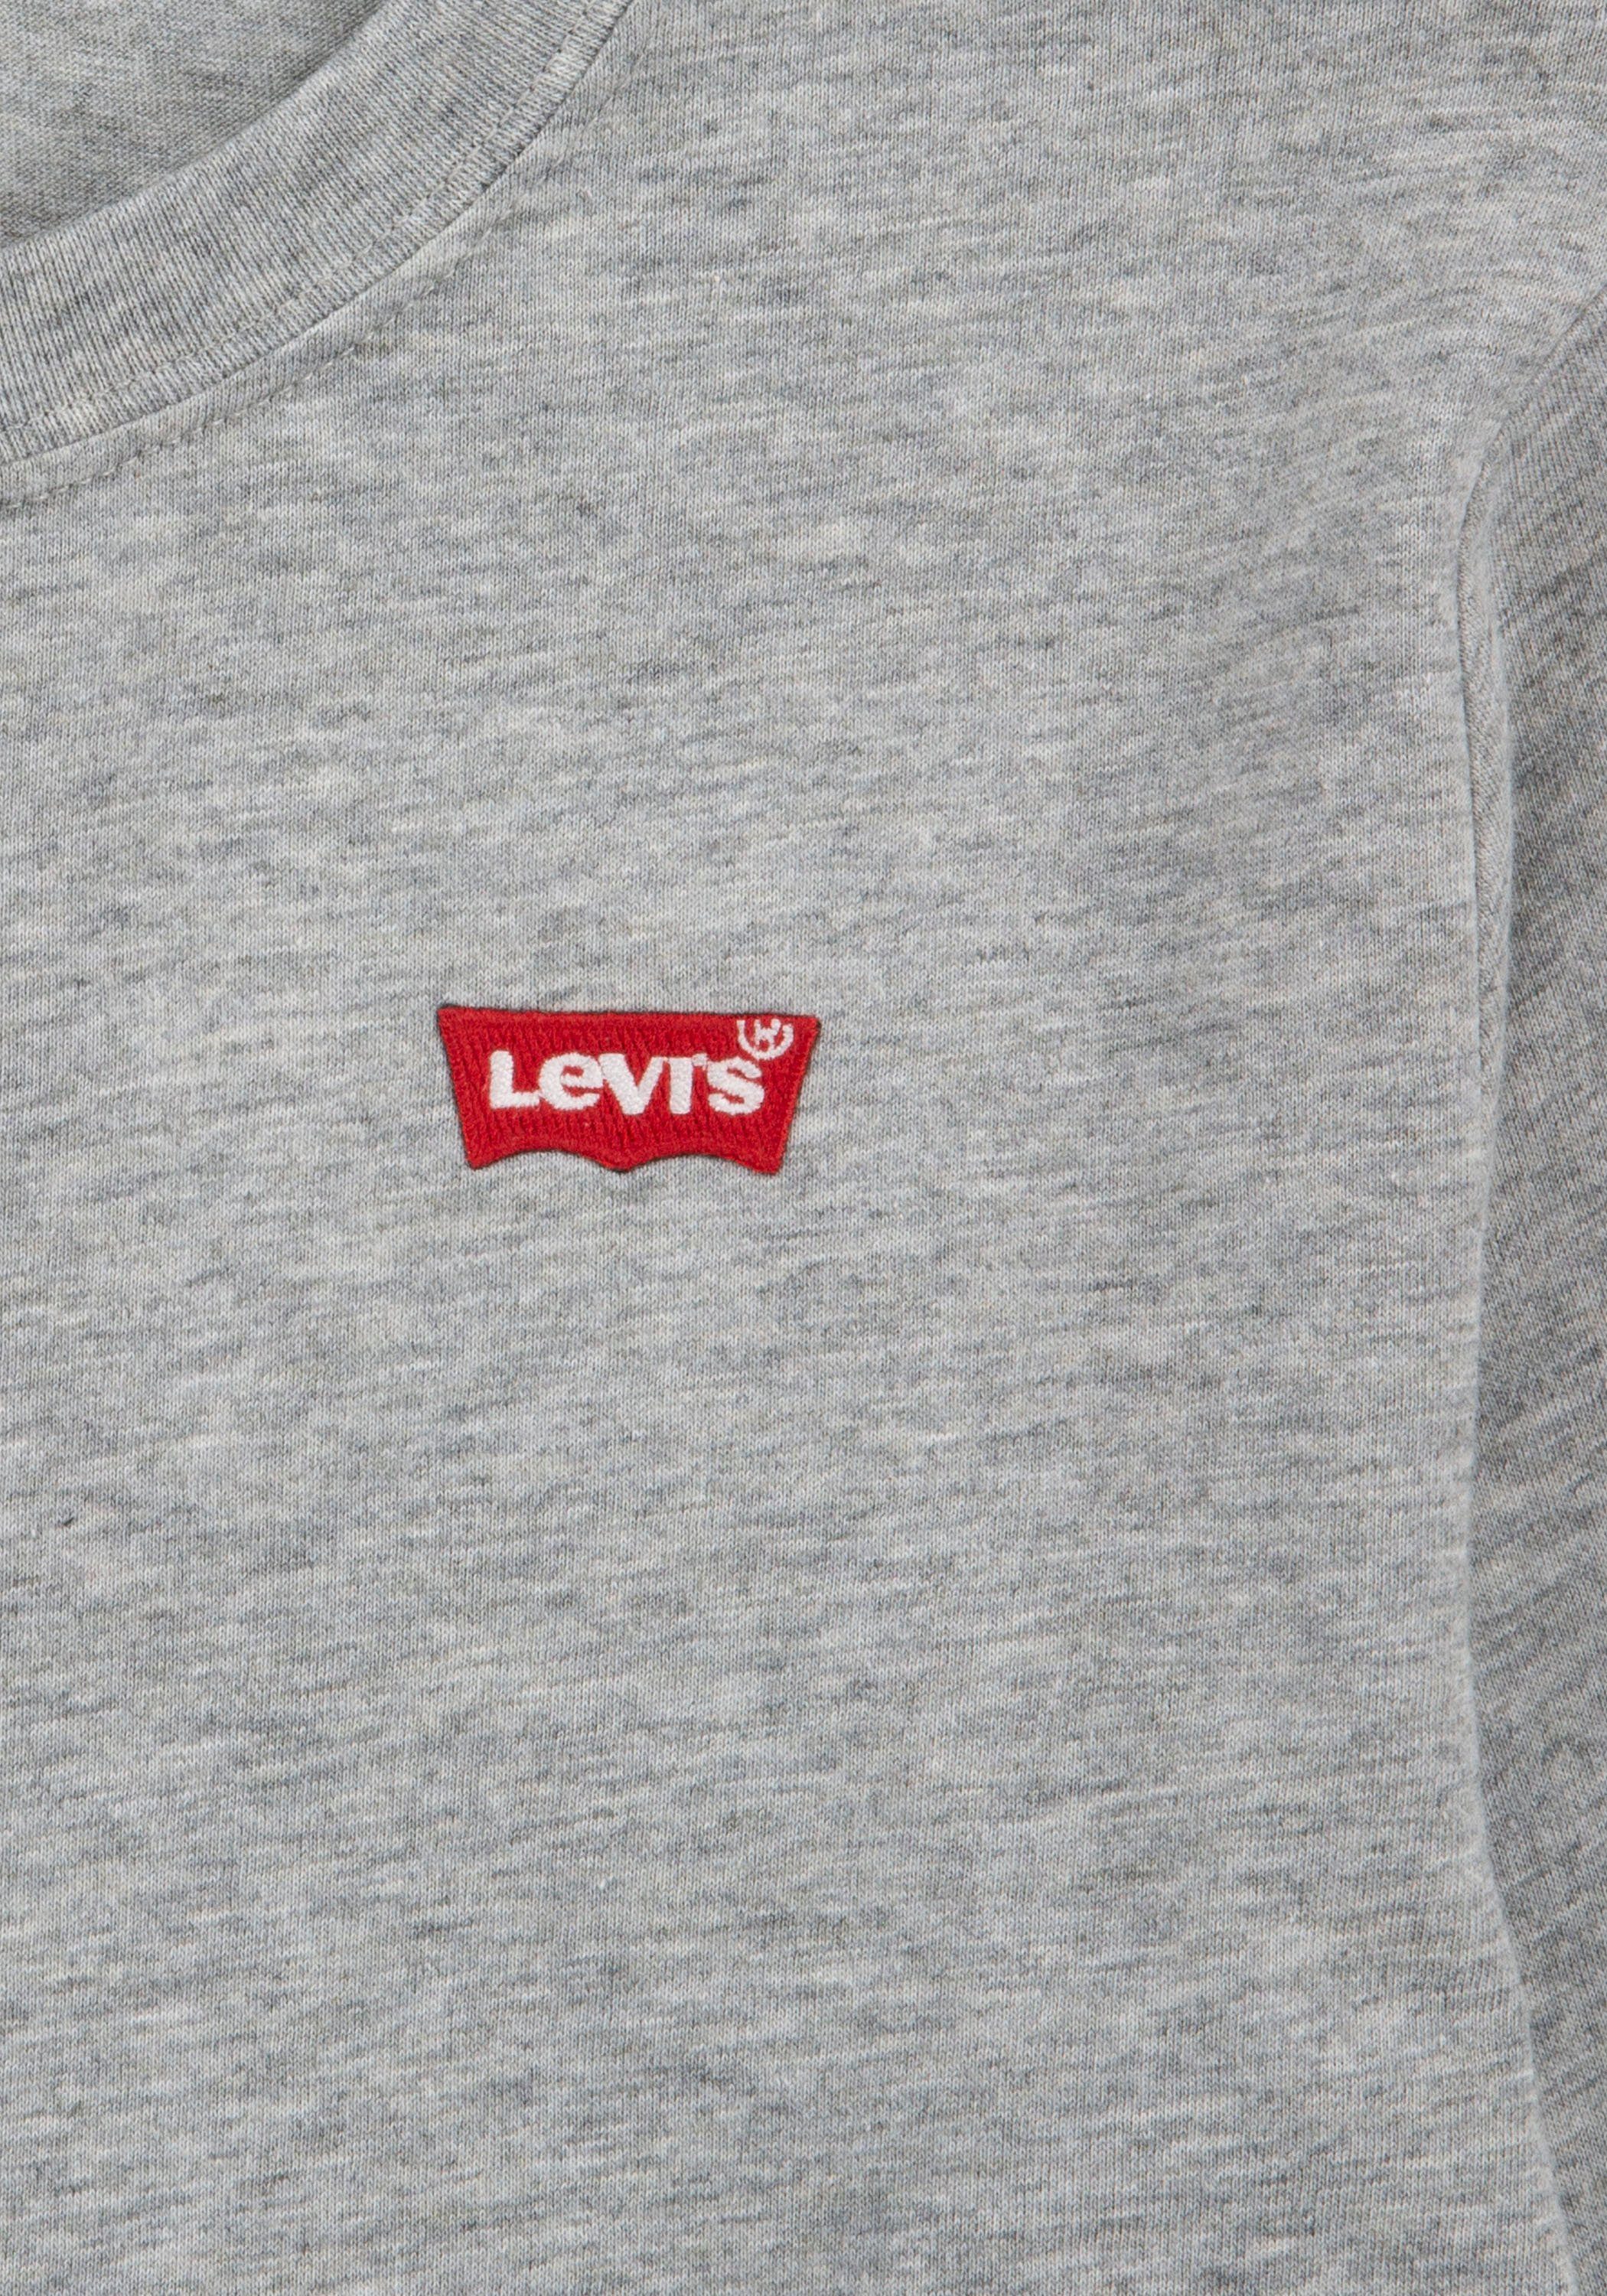 Levi's® Kids grey BATWING TEE BOYS for heather Langarmshirt L/S CHESTHIT